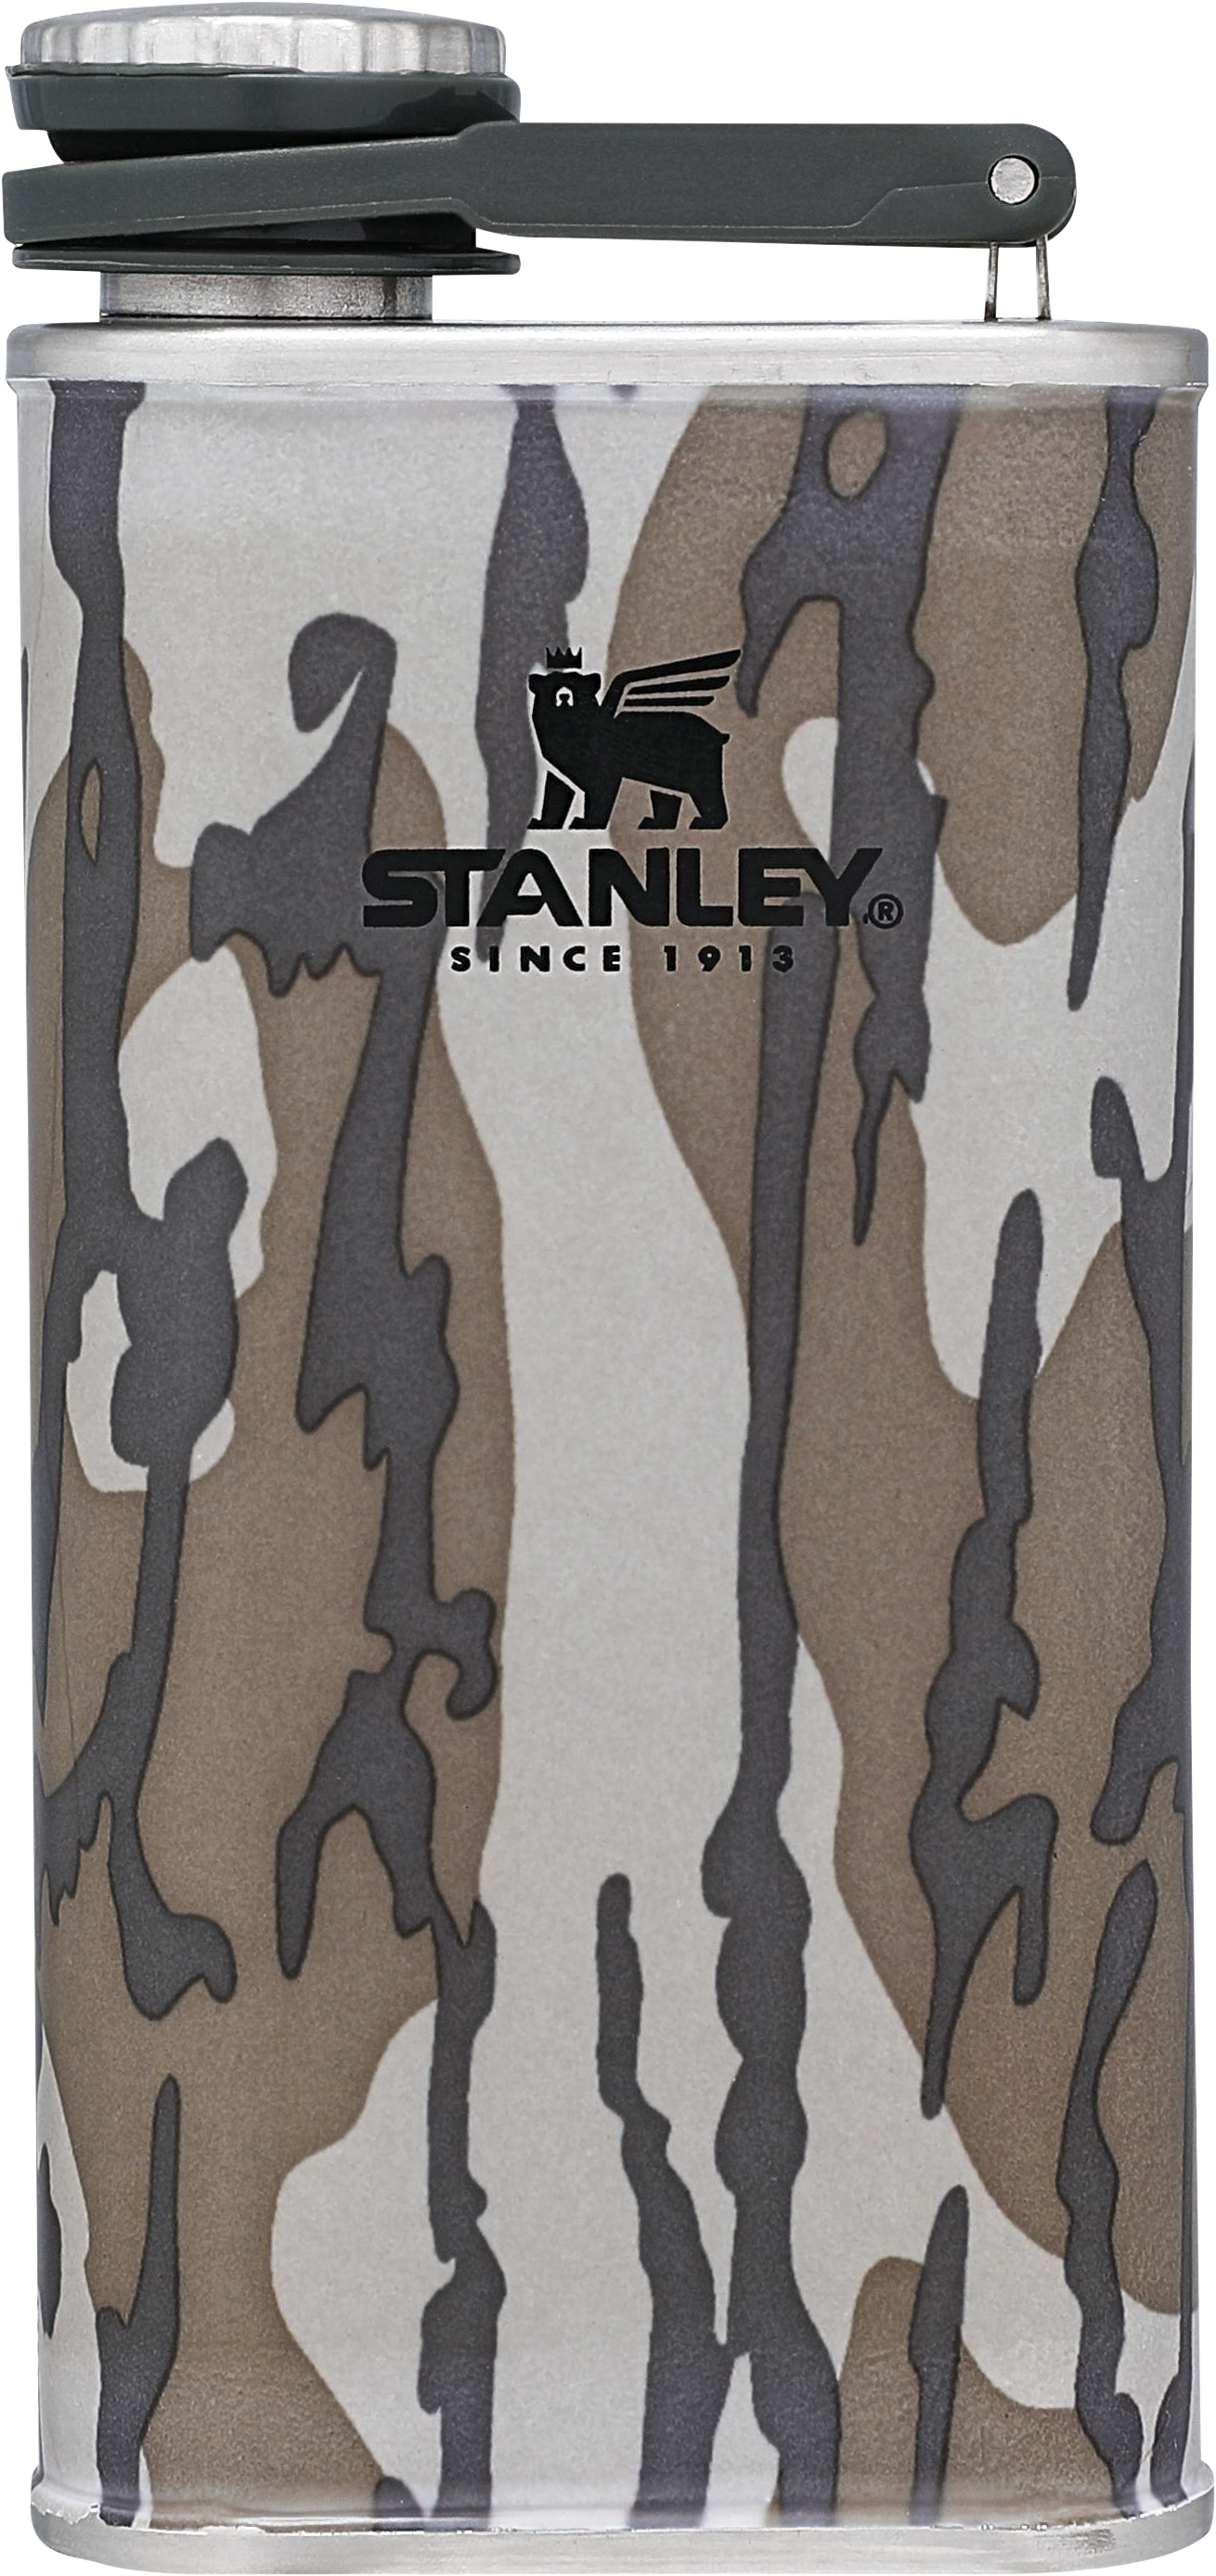 https://image.menswearhouse.com/is/image/TMW/TMW_8XHV_03_STANLEY_GIFTS_BOTTOMLAND_CAMO_MAIN?impolicy=affiliate600